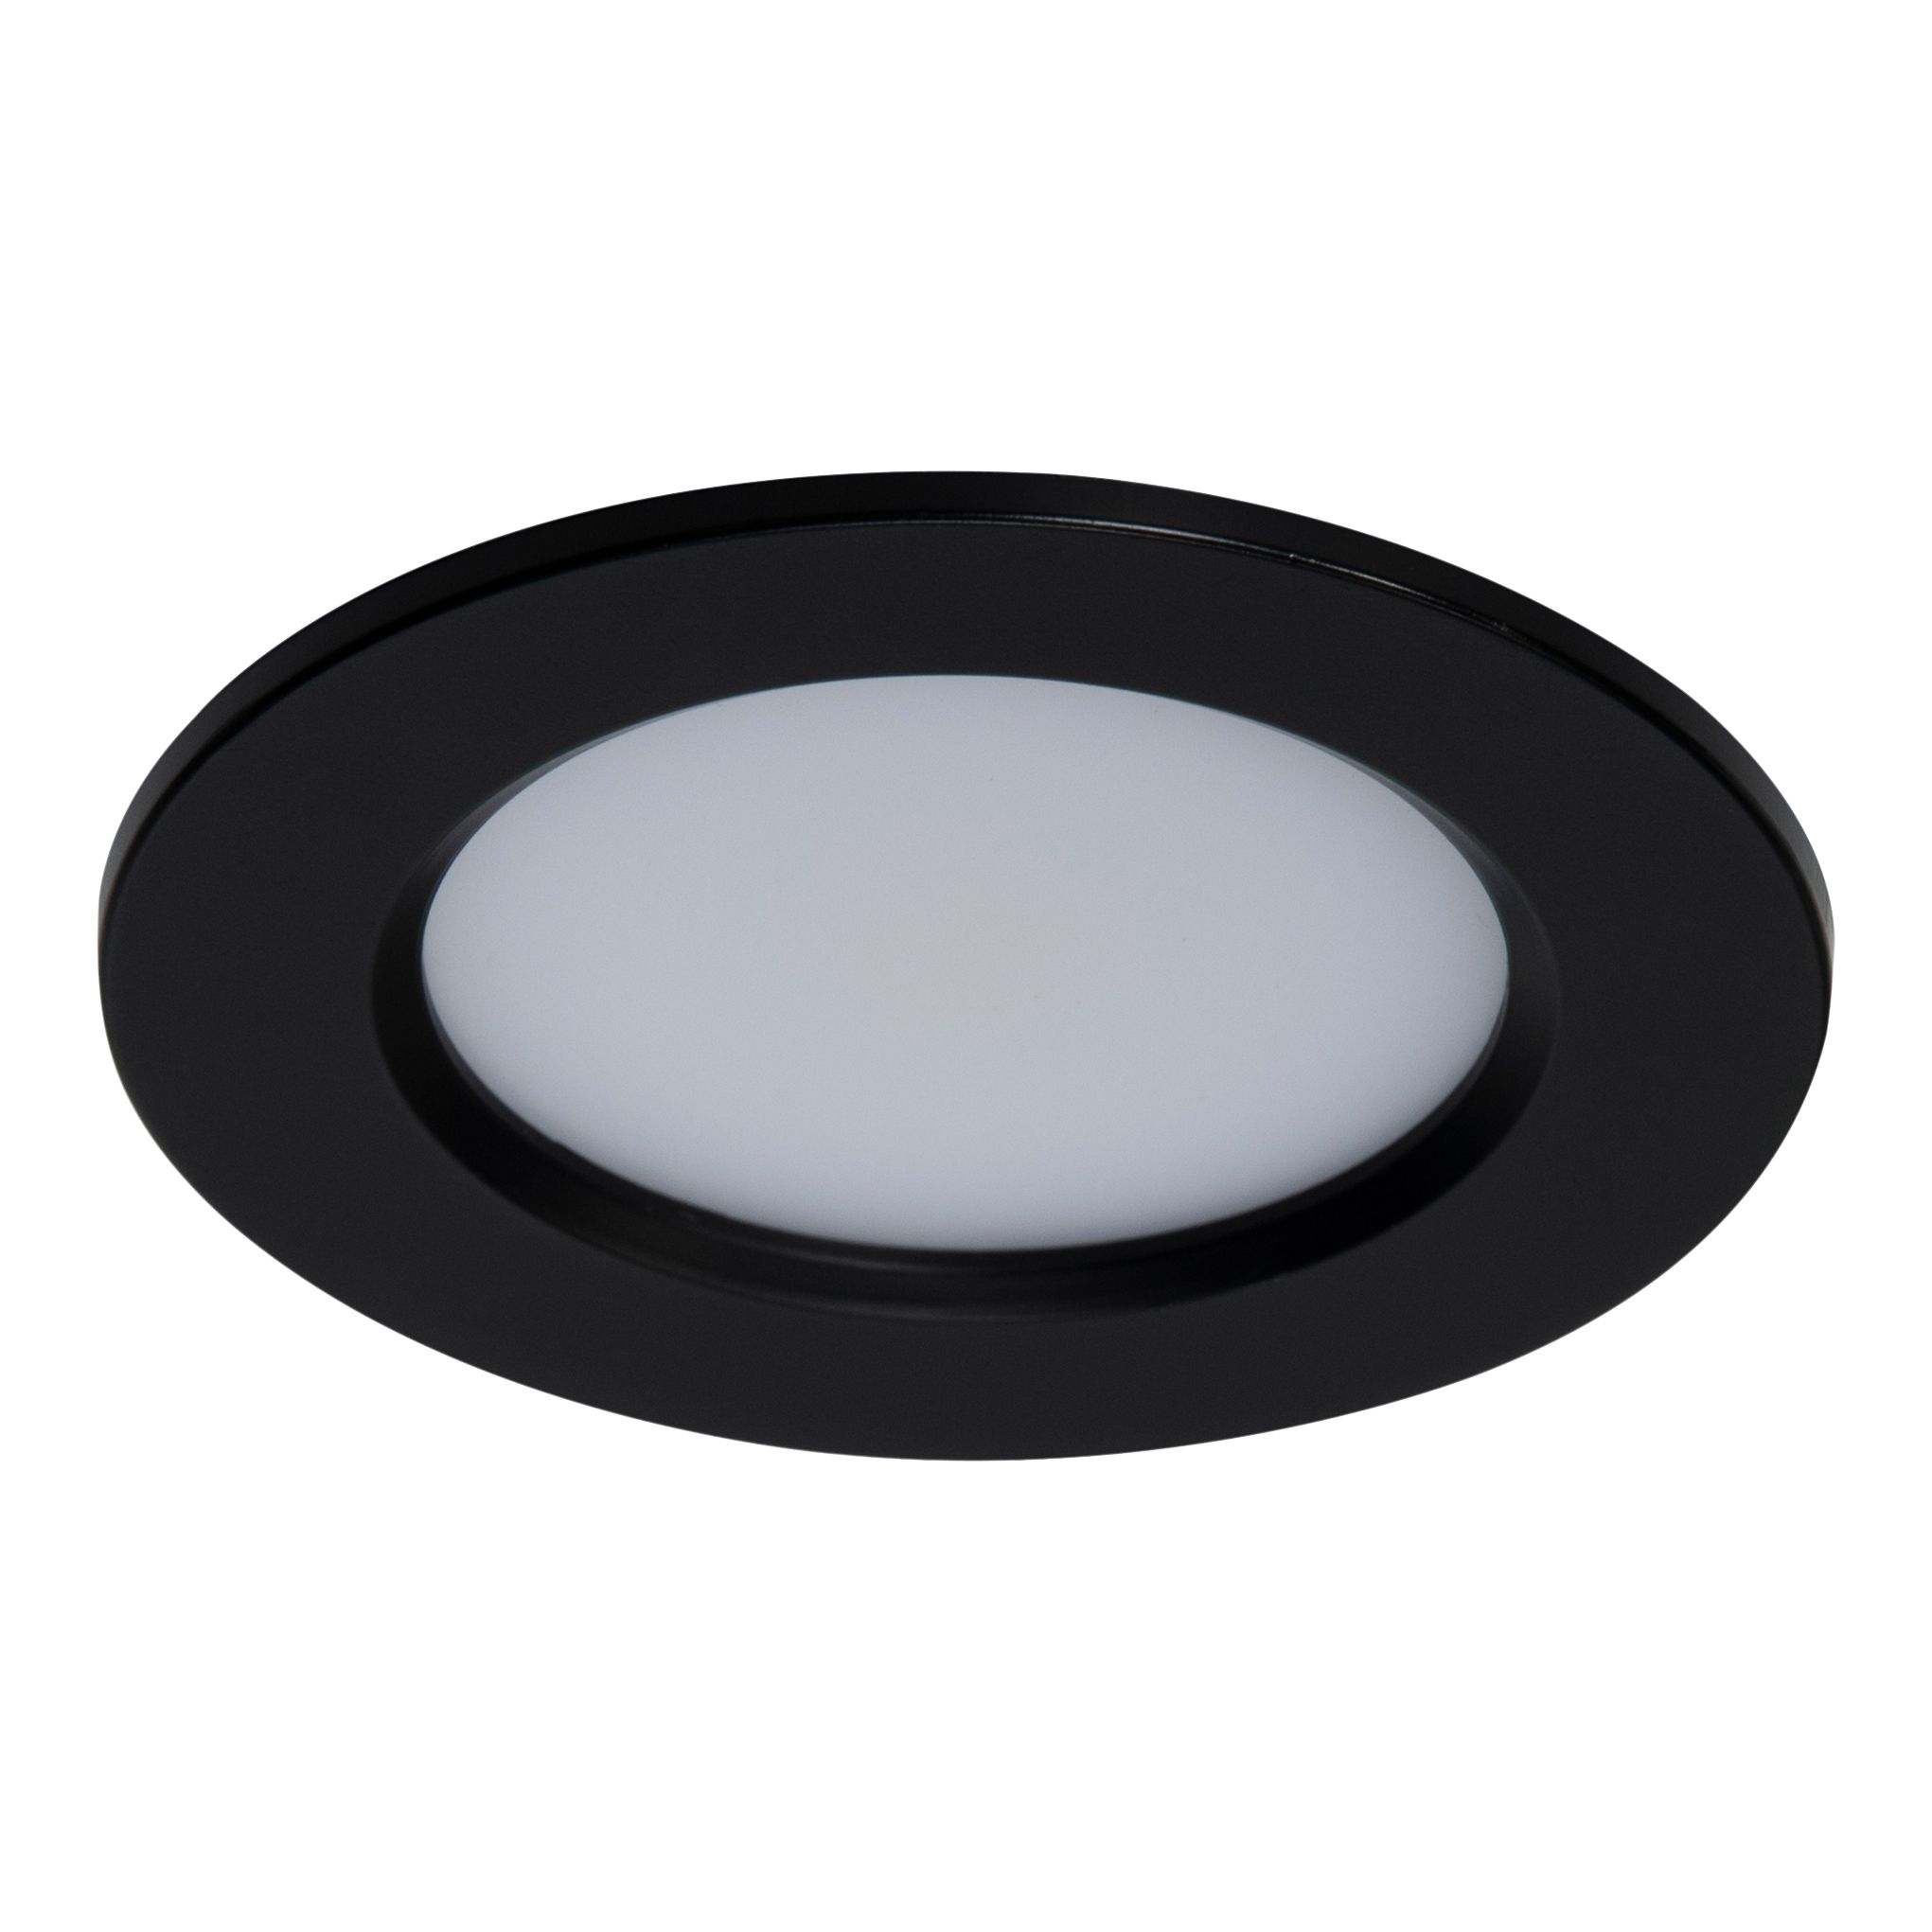 GoodHome Ledyard Black Mains-powered LED Neutral white Cabinet downlight IP20 (L)64mm (W)64mm, Pack of 3